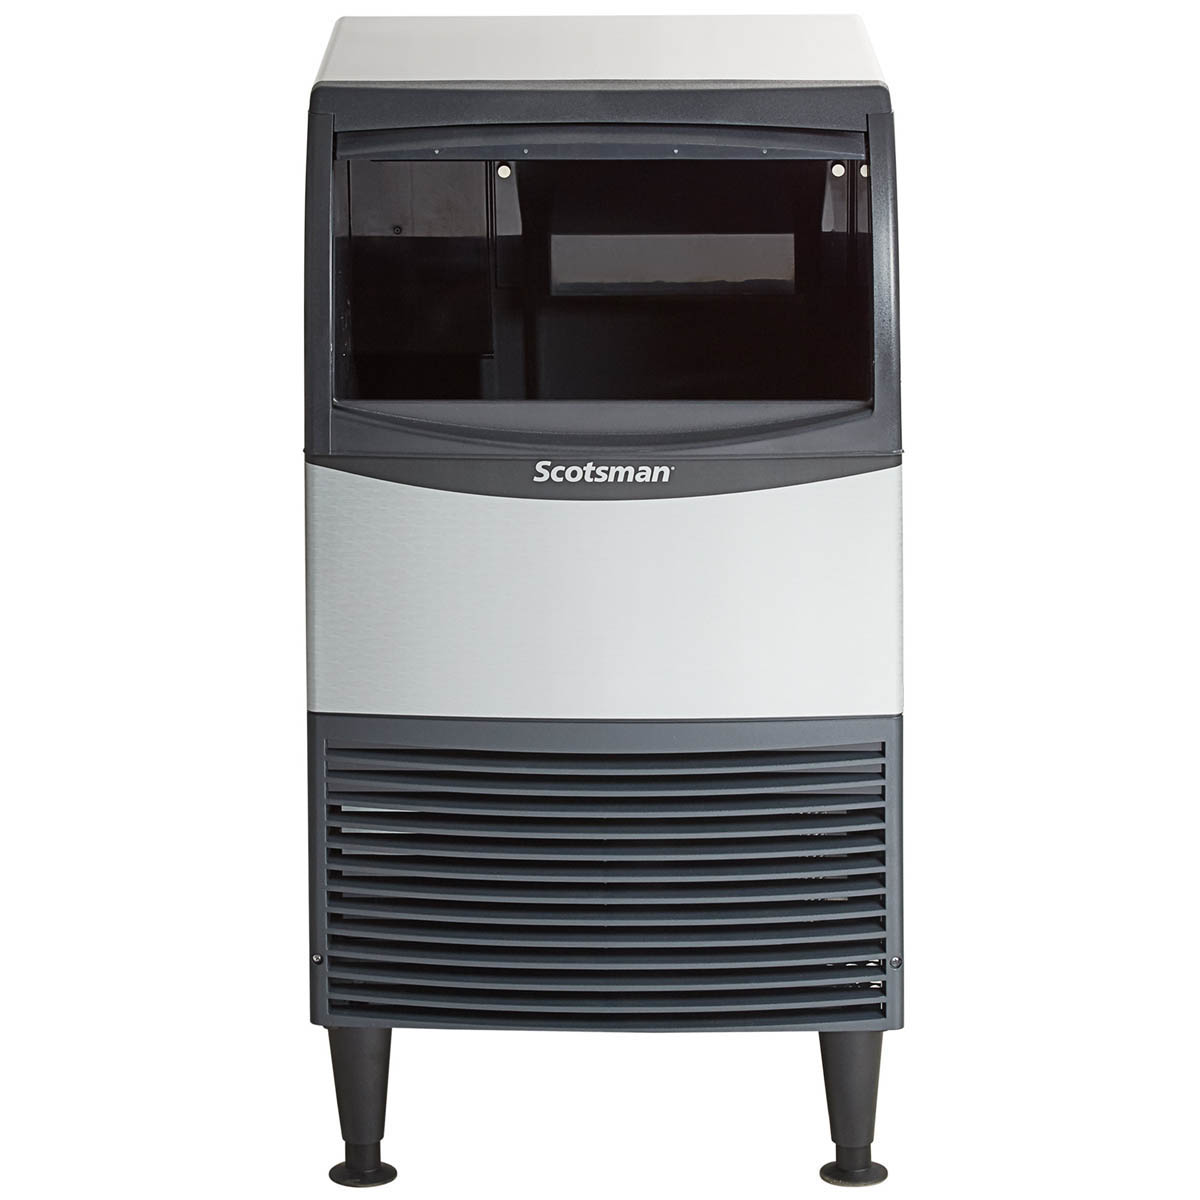 Scotsman UN1520A-1 Provides Soft and Slow Melting For Your Service and Displays, Chef's Deal